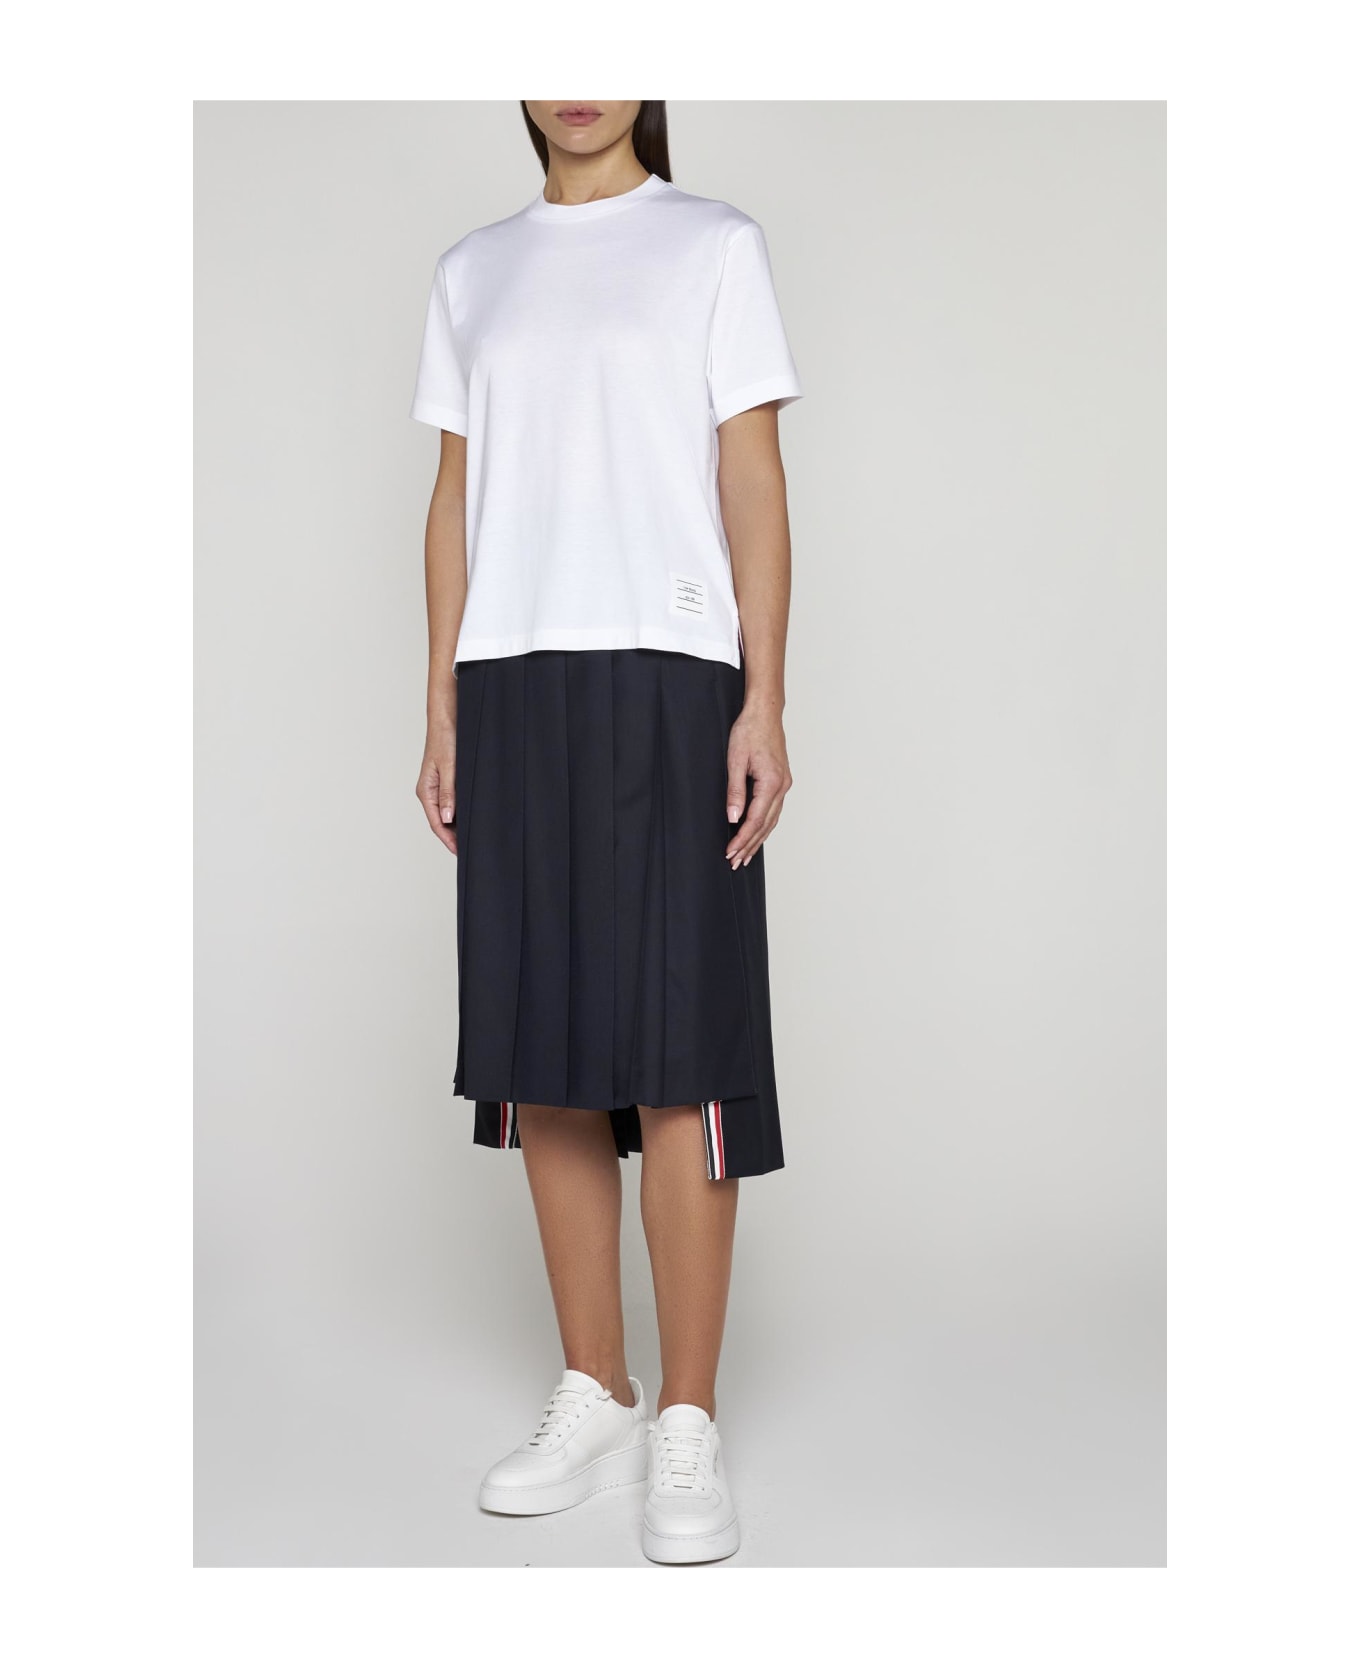 Thom Browne Relaxed-fit Cotton T-shirt - White